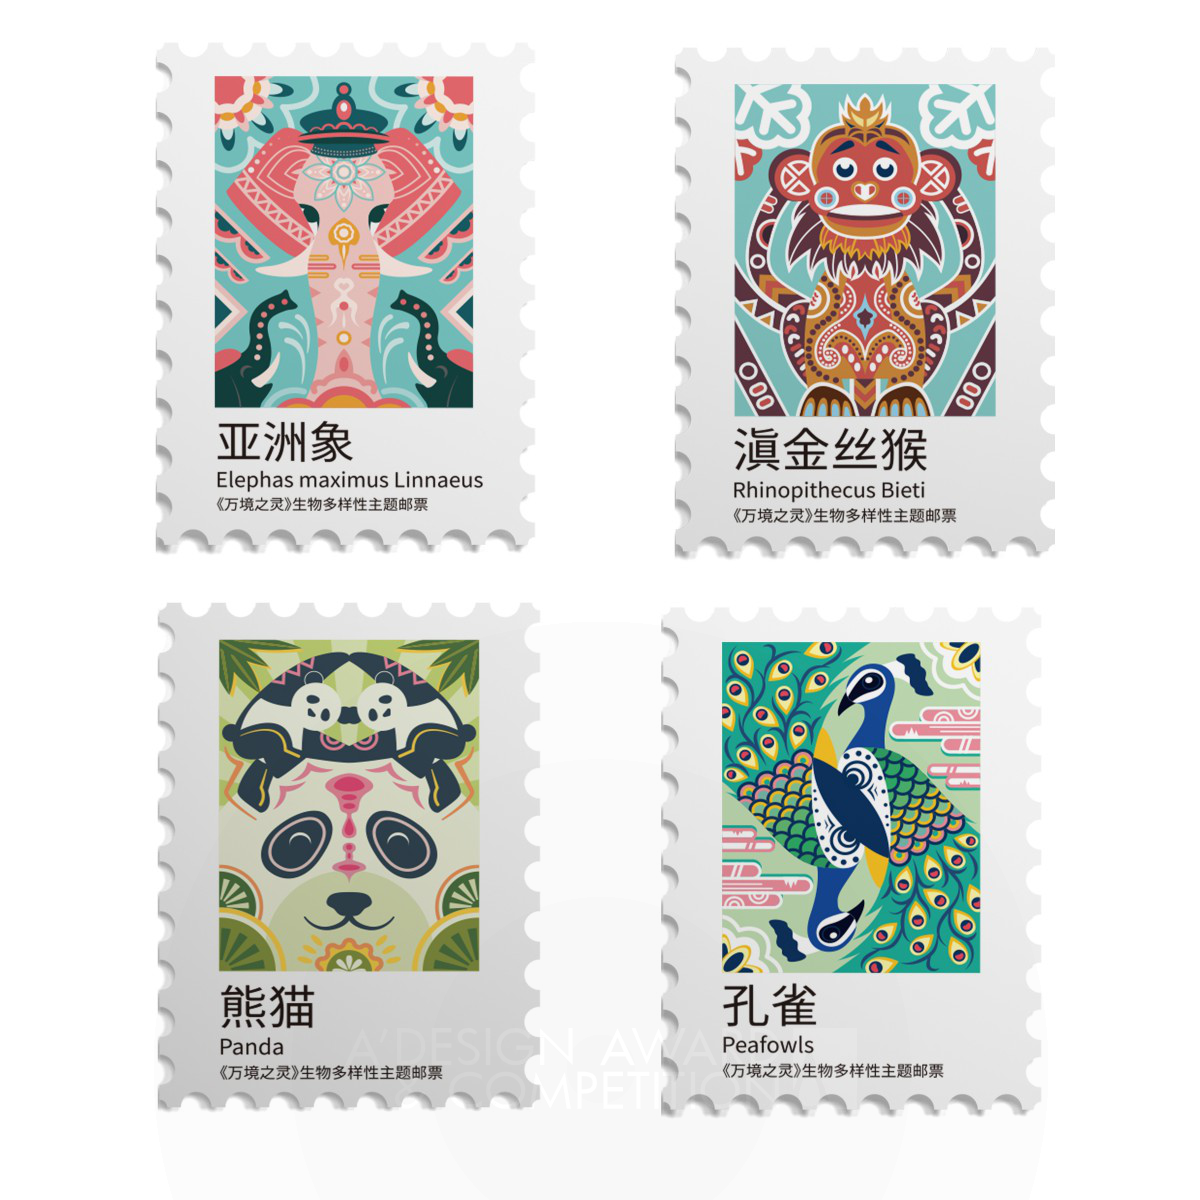 Animal Deadee Stamp Illustration  by WEIWEI ZHANG